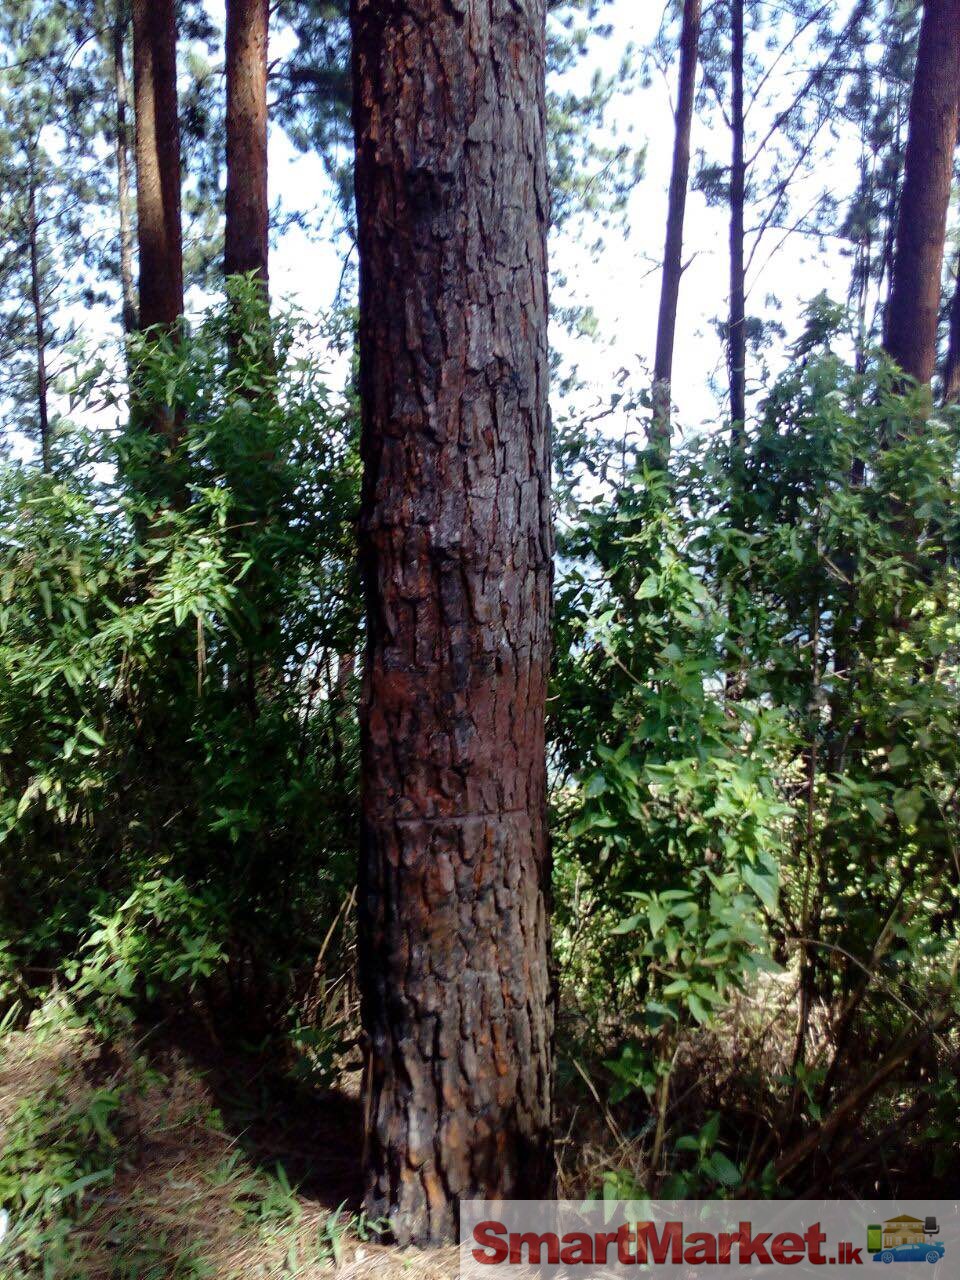 Land with pine trees for sale in Hatton